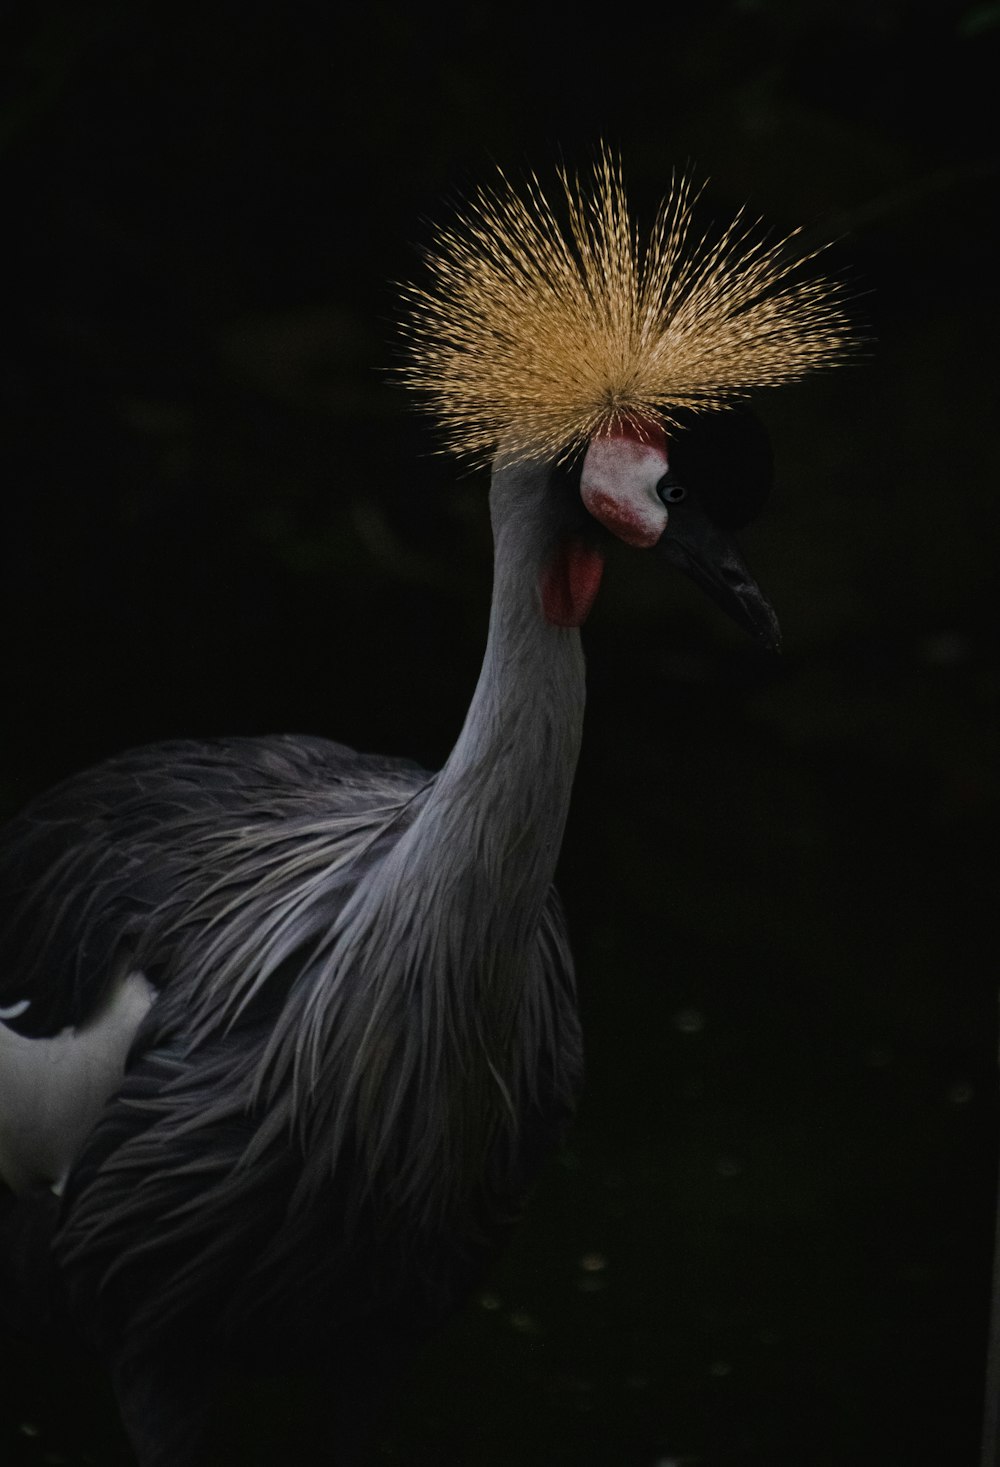 a bird with a yellow mohawk on its head